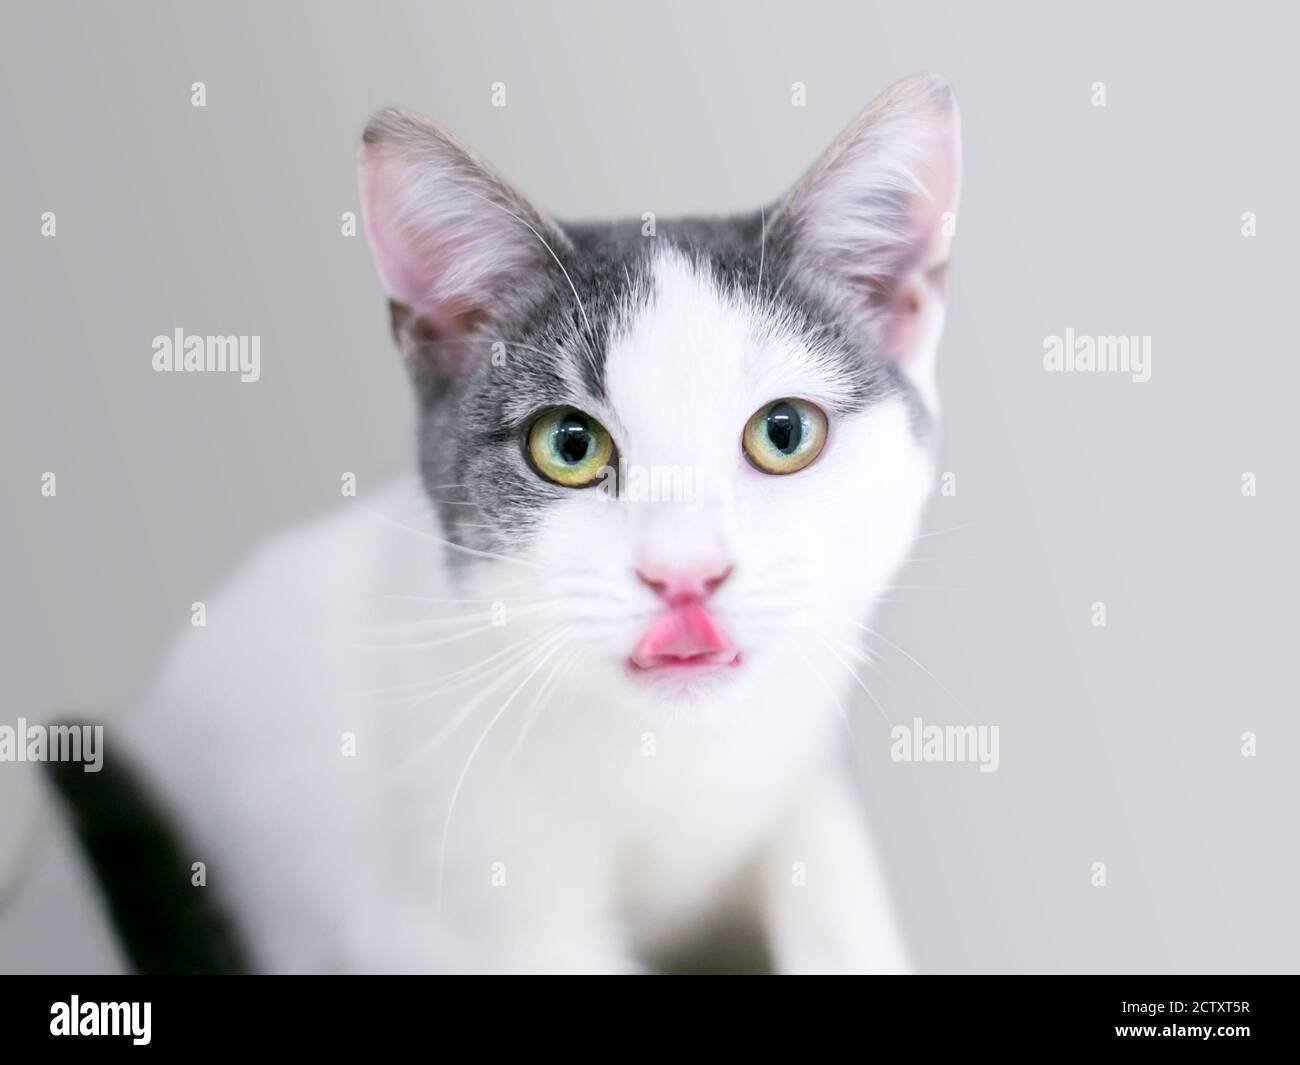 A gray and white shorthair kitten looking at the camera and licking its lips Stock Photo